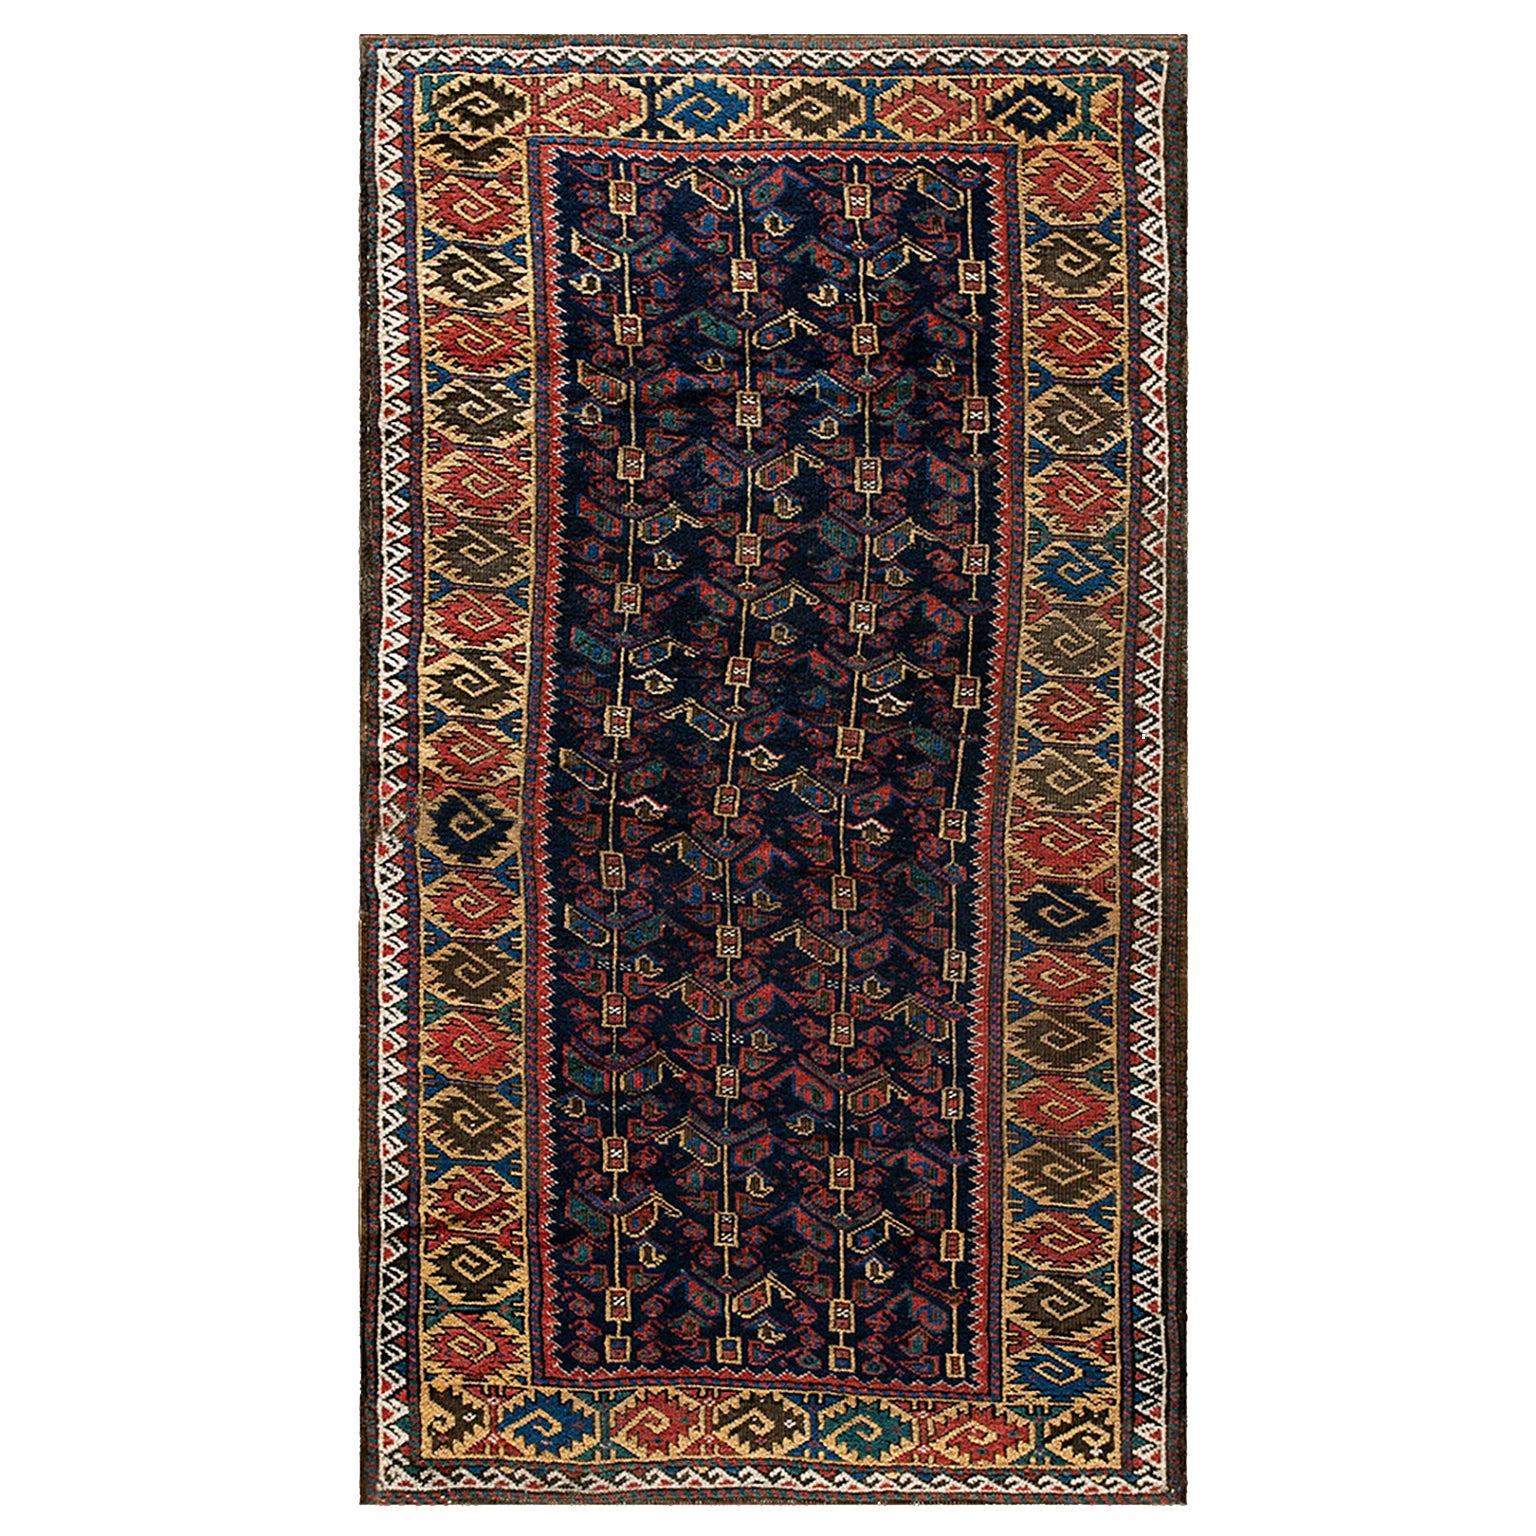 Late 119th Century Persian ( Arab ) Baluch Carpet ( 2'10" x 5'2" - 86 x 157 ) For Sale